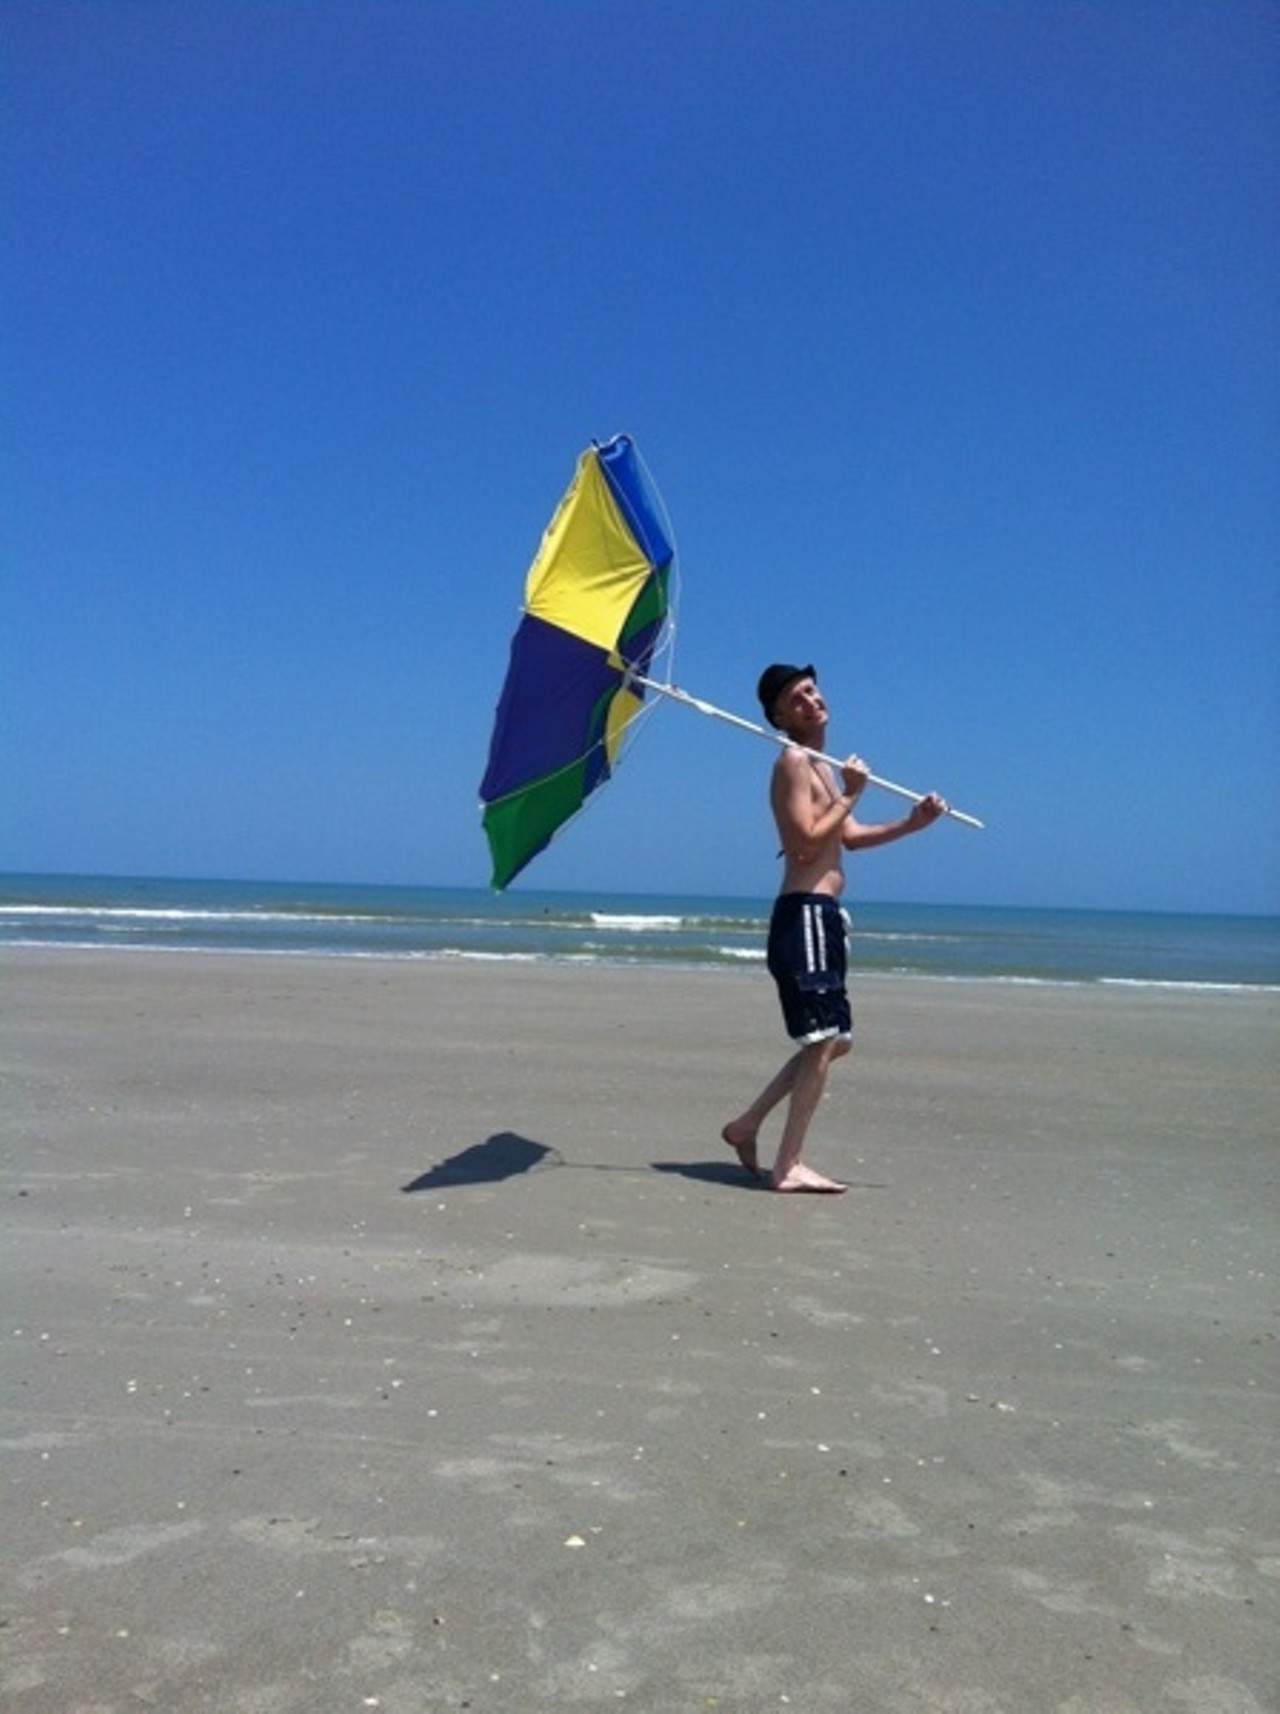 Windy day at Cocoa Beach